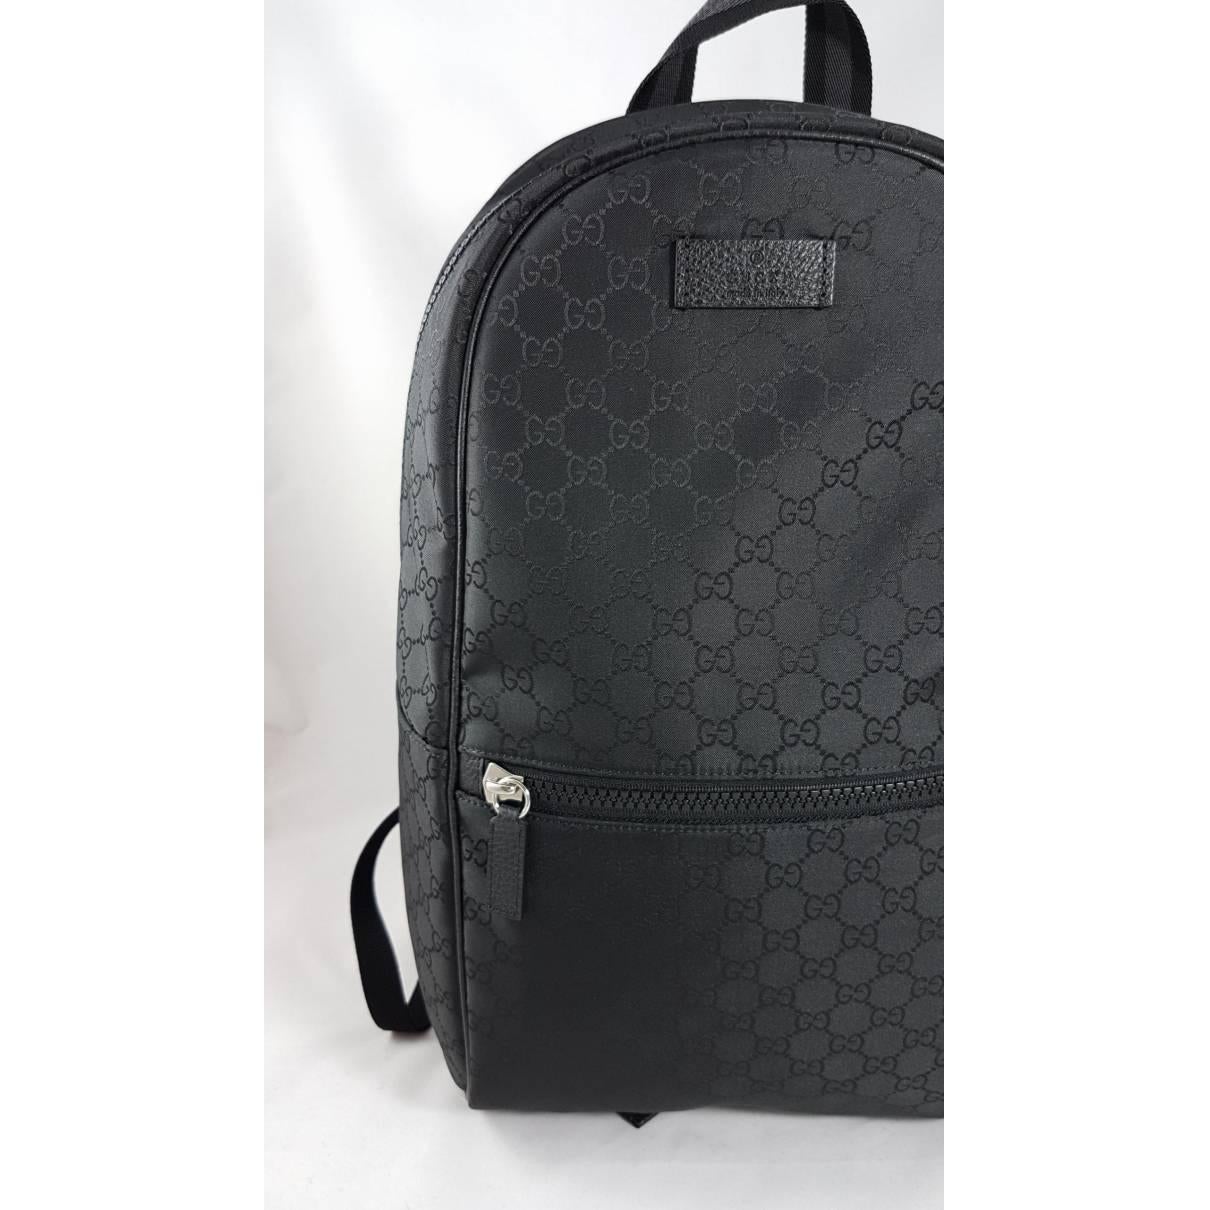 Gucci GG Guccissima Backpack.
Style 449181Smooth Black Nylon
GG Guccissima Pattern
Exterior Front Zip Compartment
Web Stripe Top Handle
Zip CloseAdjustable Padded Shoulder 
StrapsInterior Zip 
CompartmentInterior 